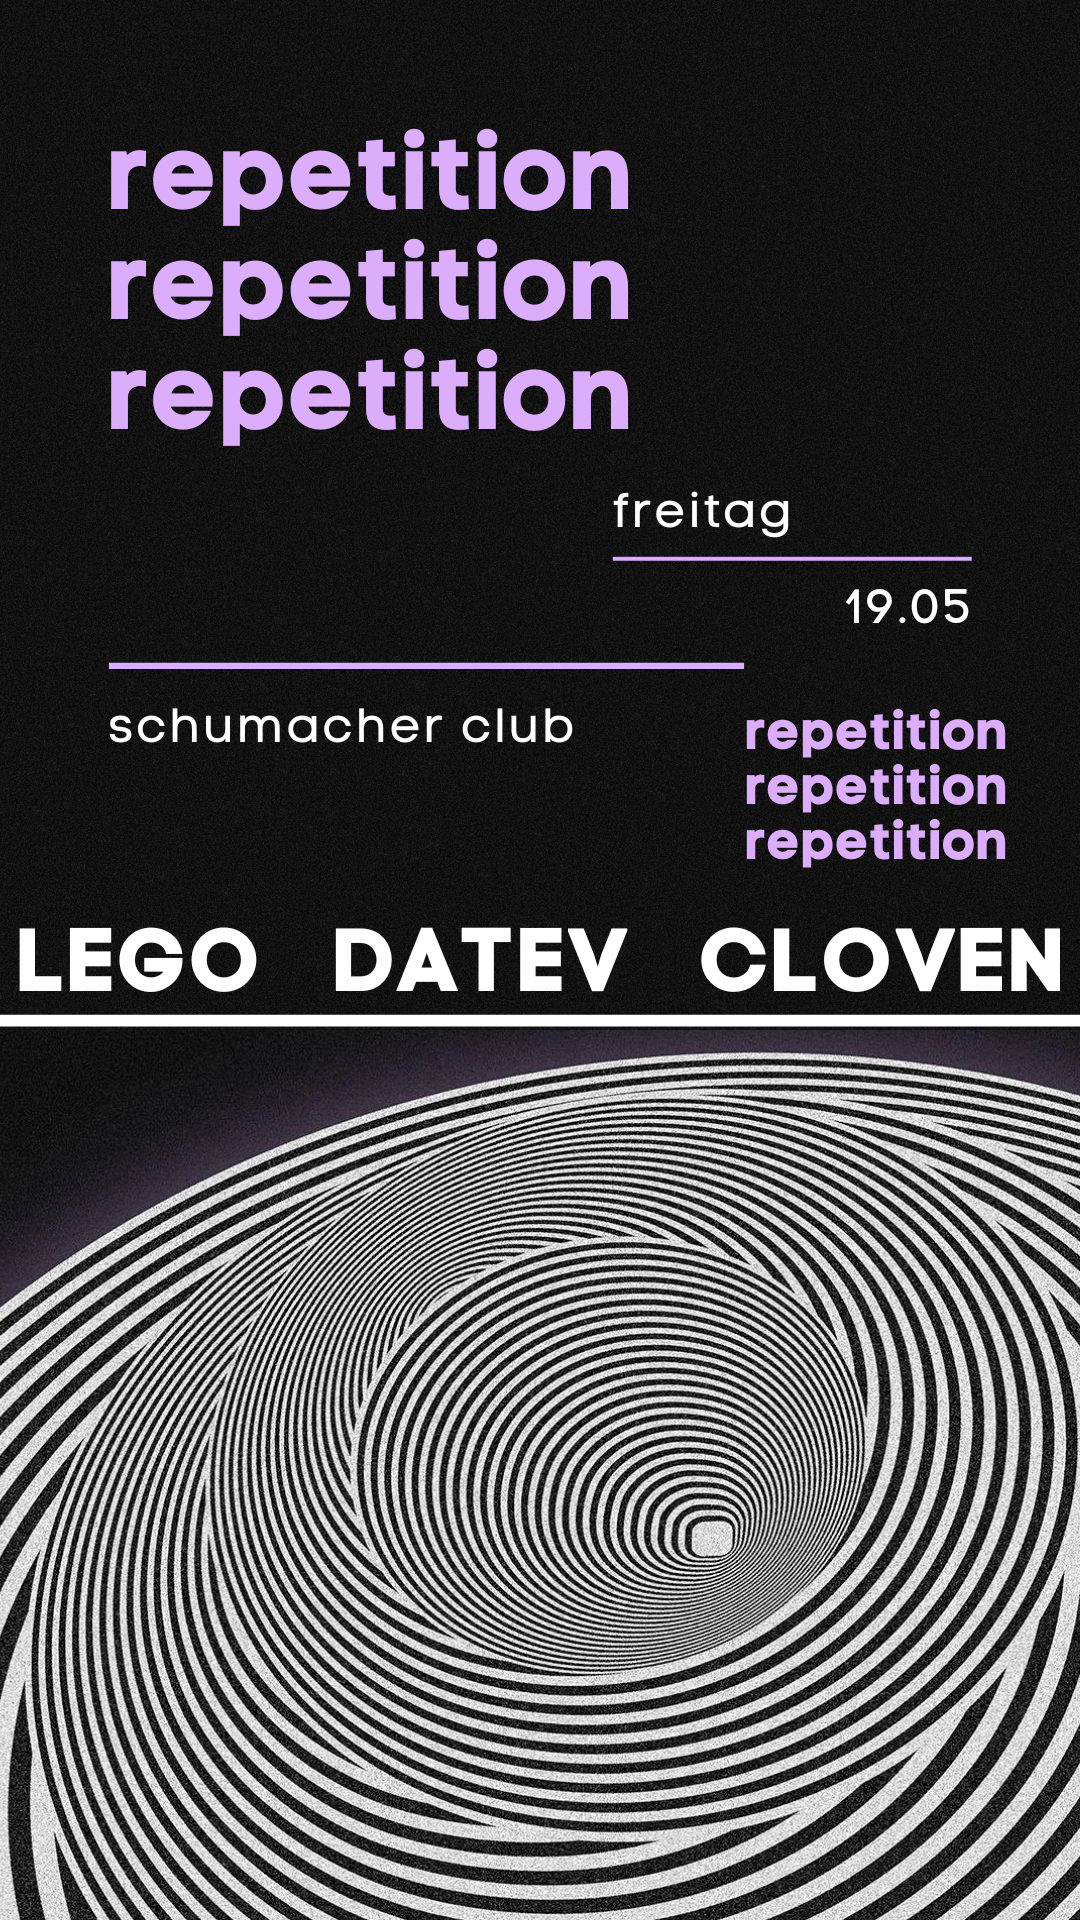 Repetition with lego (Parabel), Cloven & DATEV - フライヤー裏